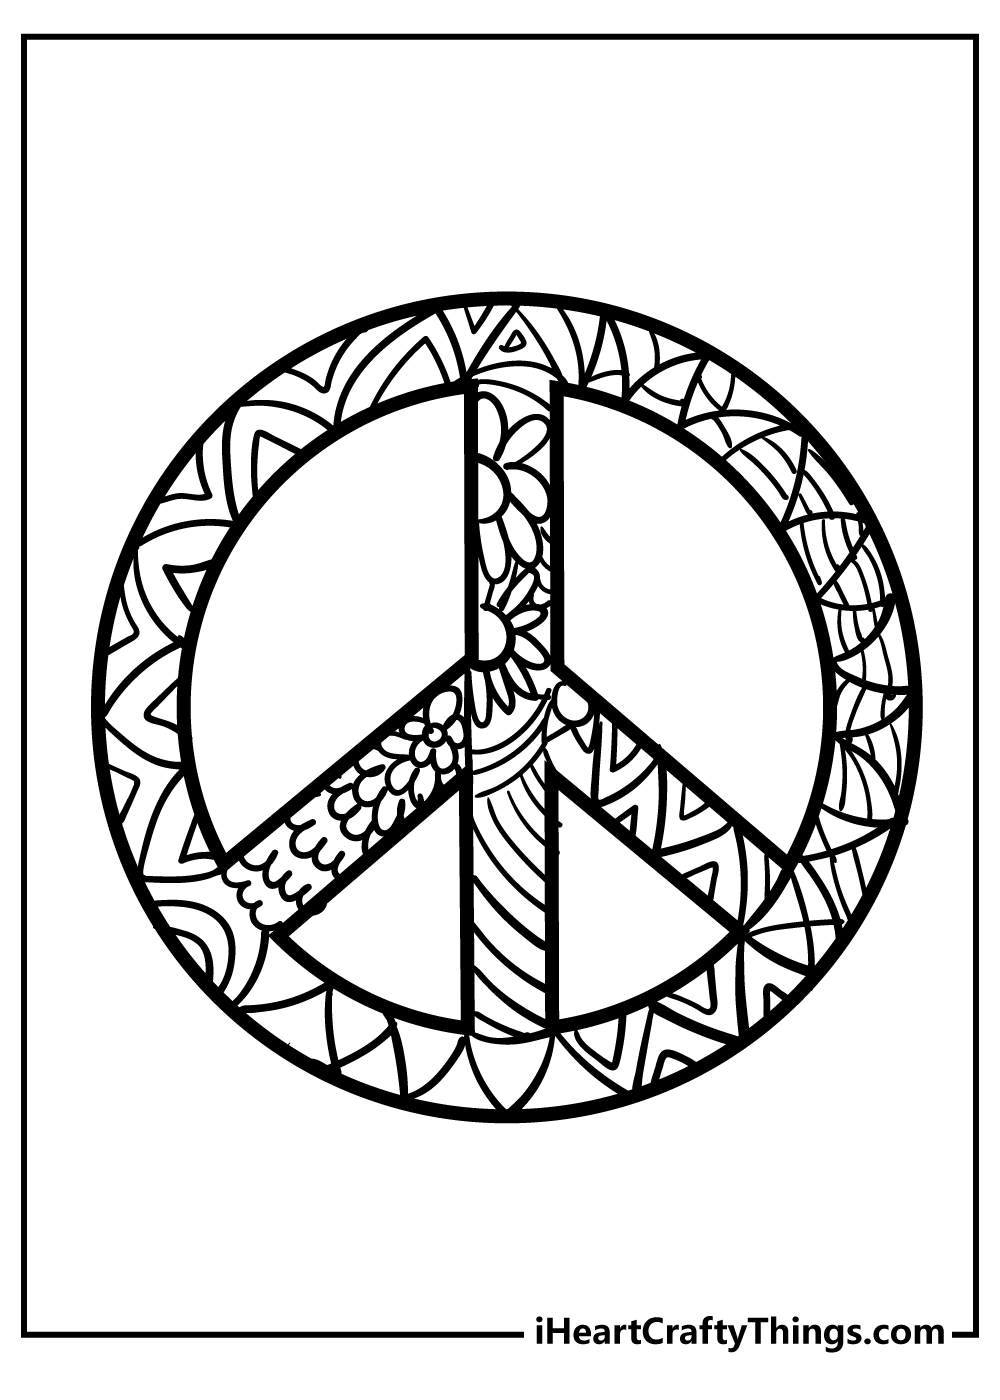 Peace Coloring Book for kids free printable